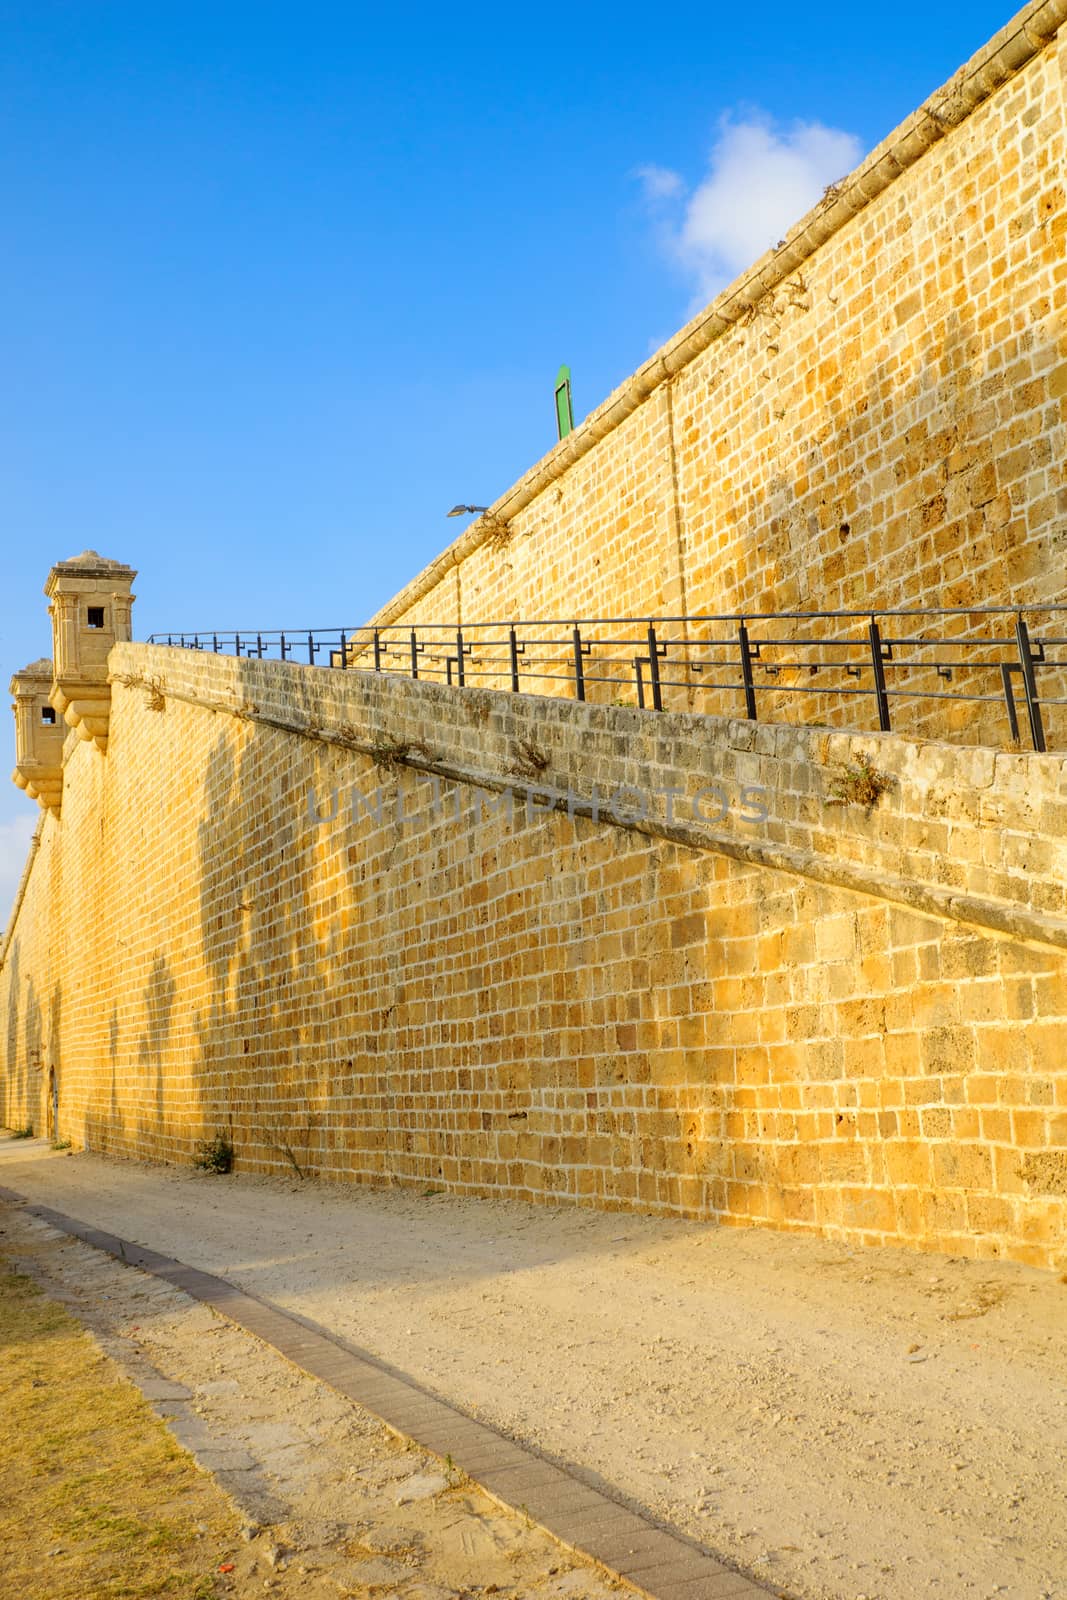 The land walls of the old city of Acre by RnDmS